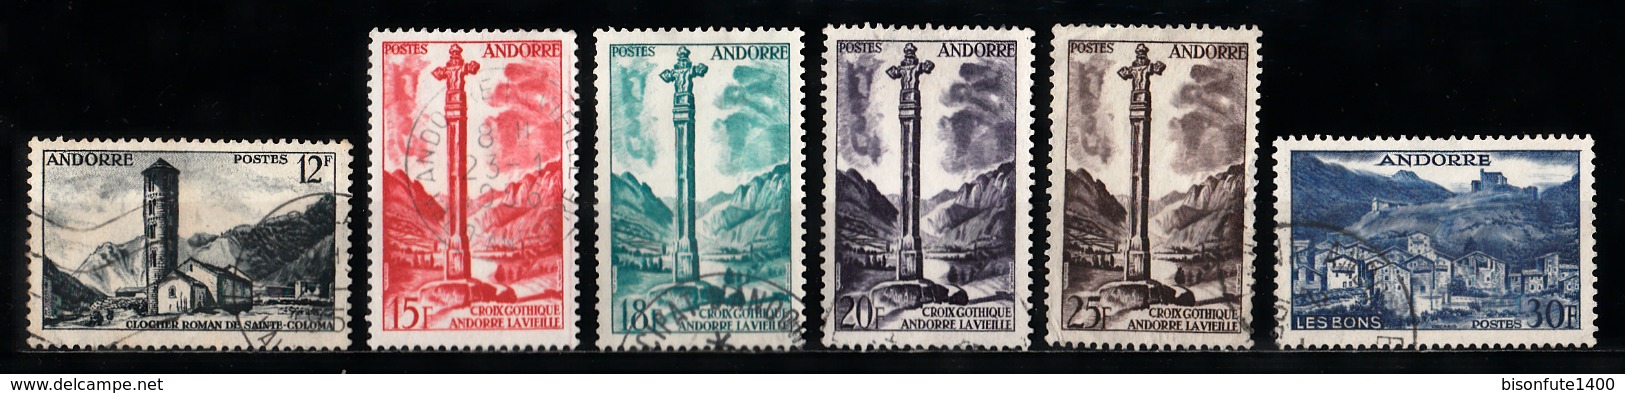 Andorre Français 1955 - 1958 : Timbres Yvert & Tellier N° 138 - 139 - 141 - 143 - 144 - 145 - 146 - 147 - 148 - 149 -... - Used Stamps